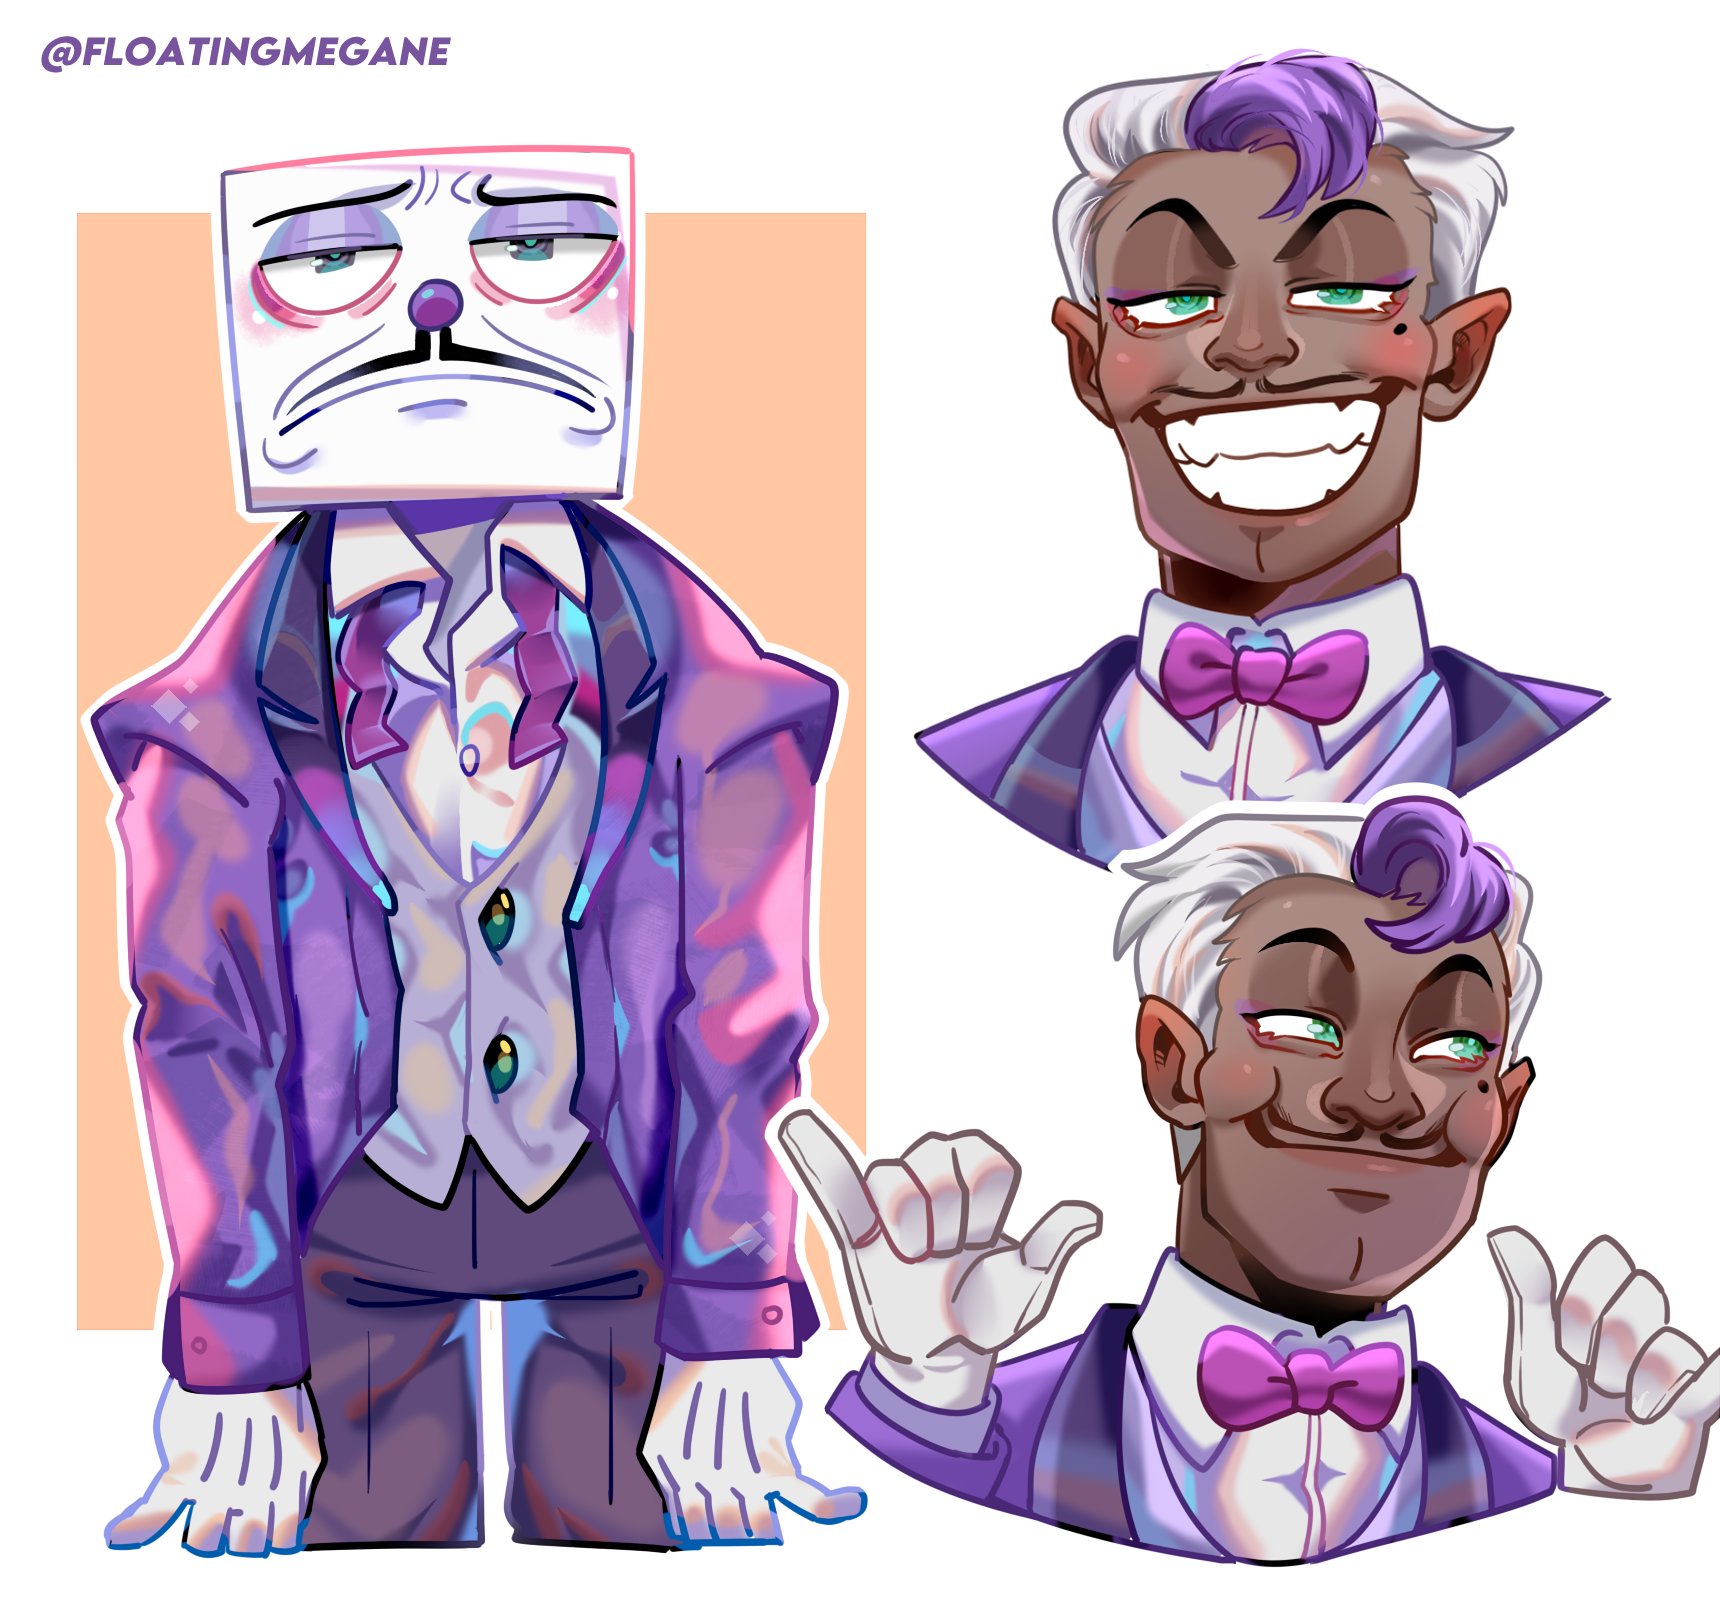 Megg @ Comifuro17 D28 a-b on X: IIIII'M MISTER KING DICE, I'M THE GAYEST  IN THE LAND #TheCupheadShow #KingDice  / X